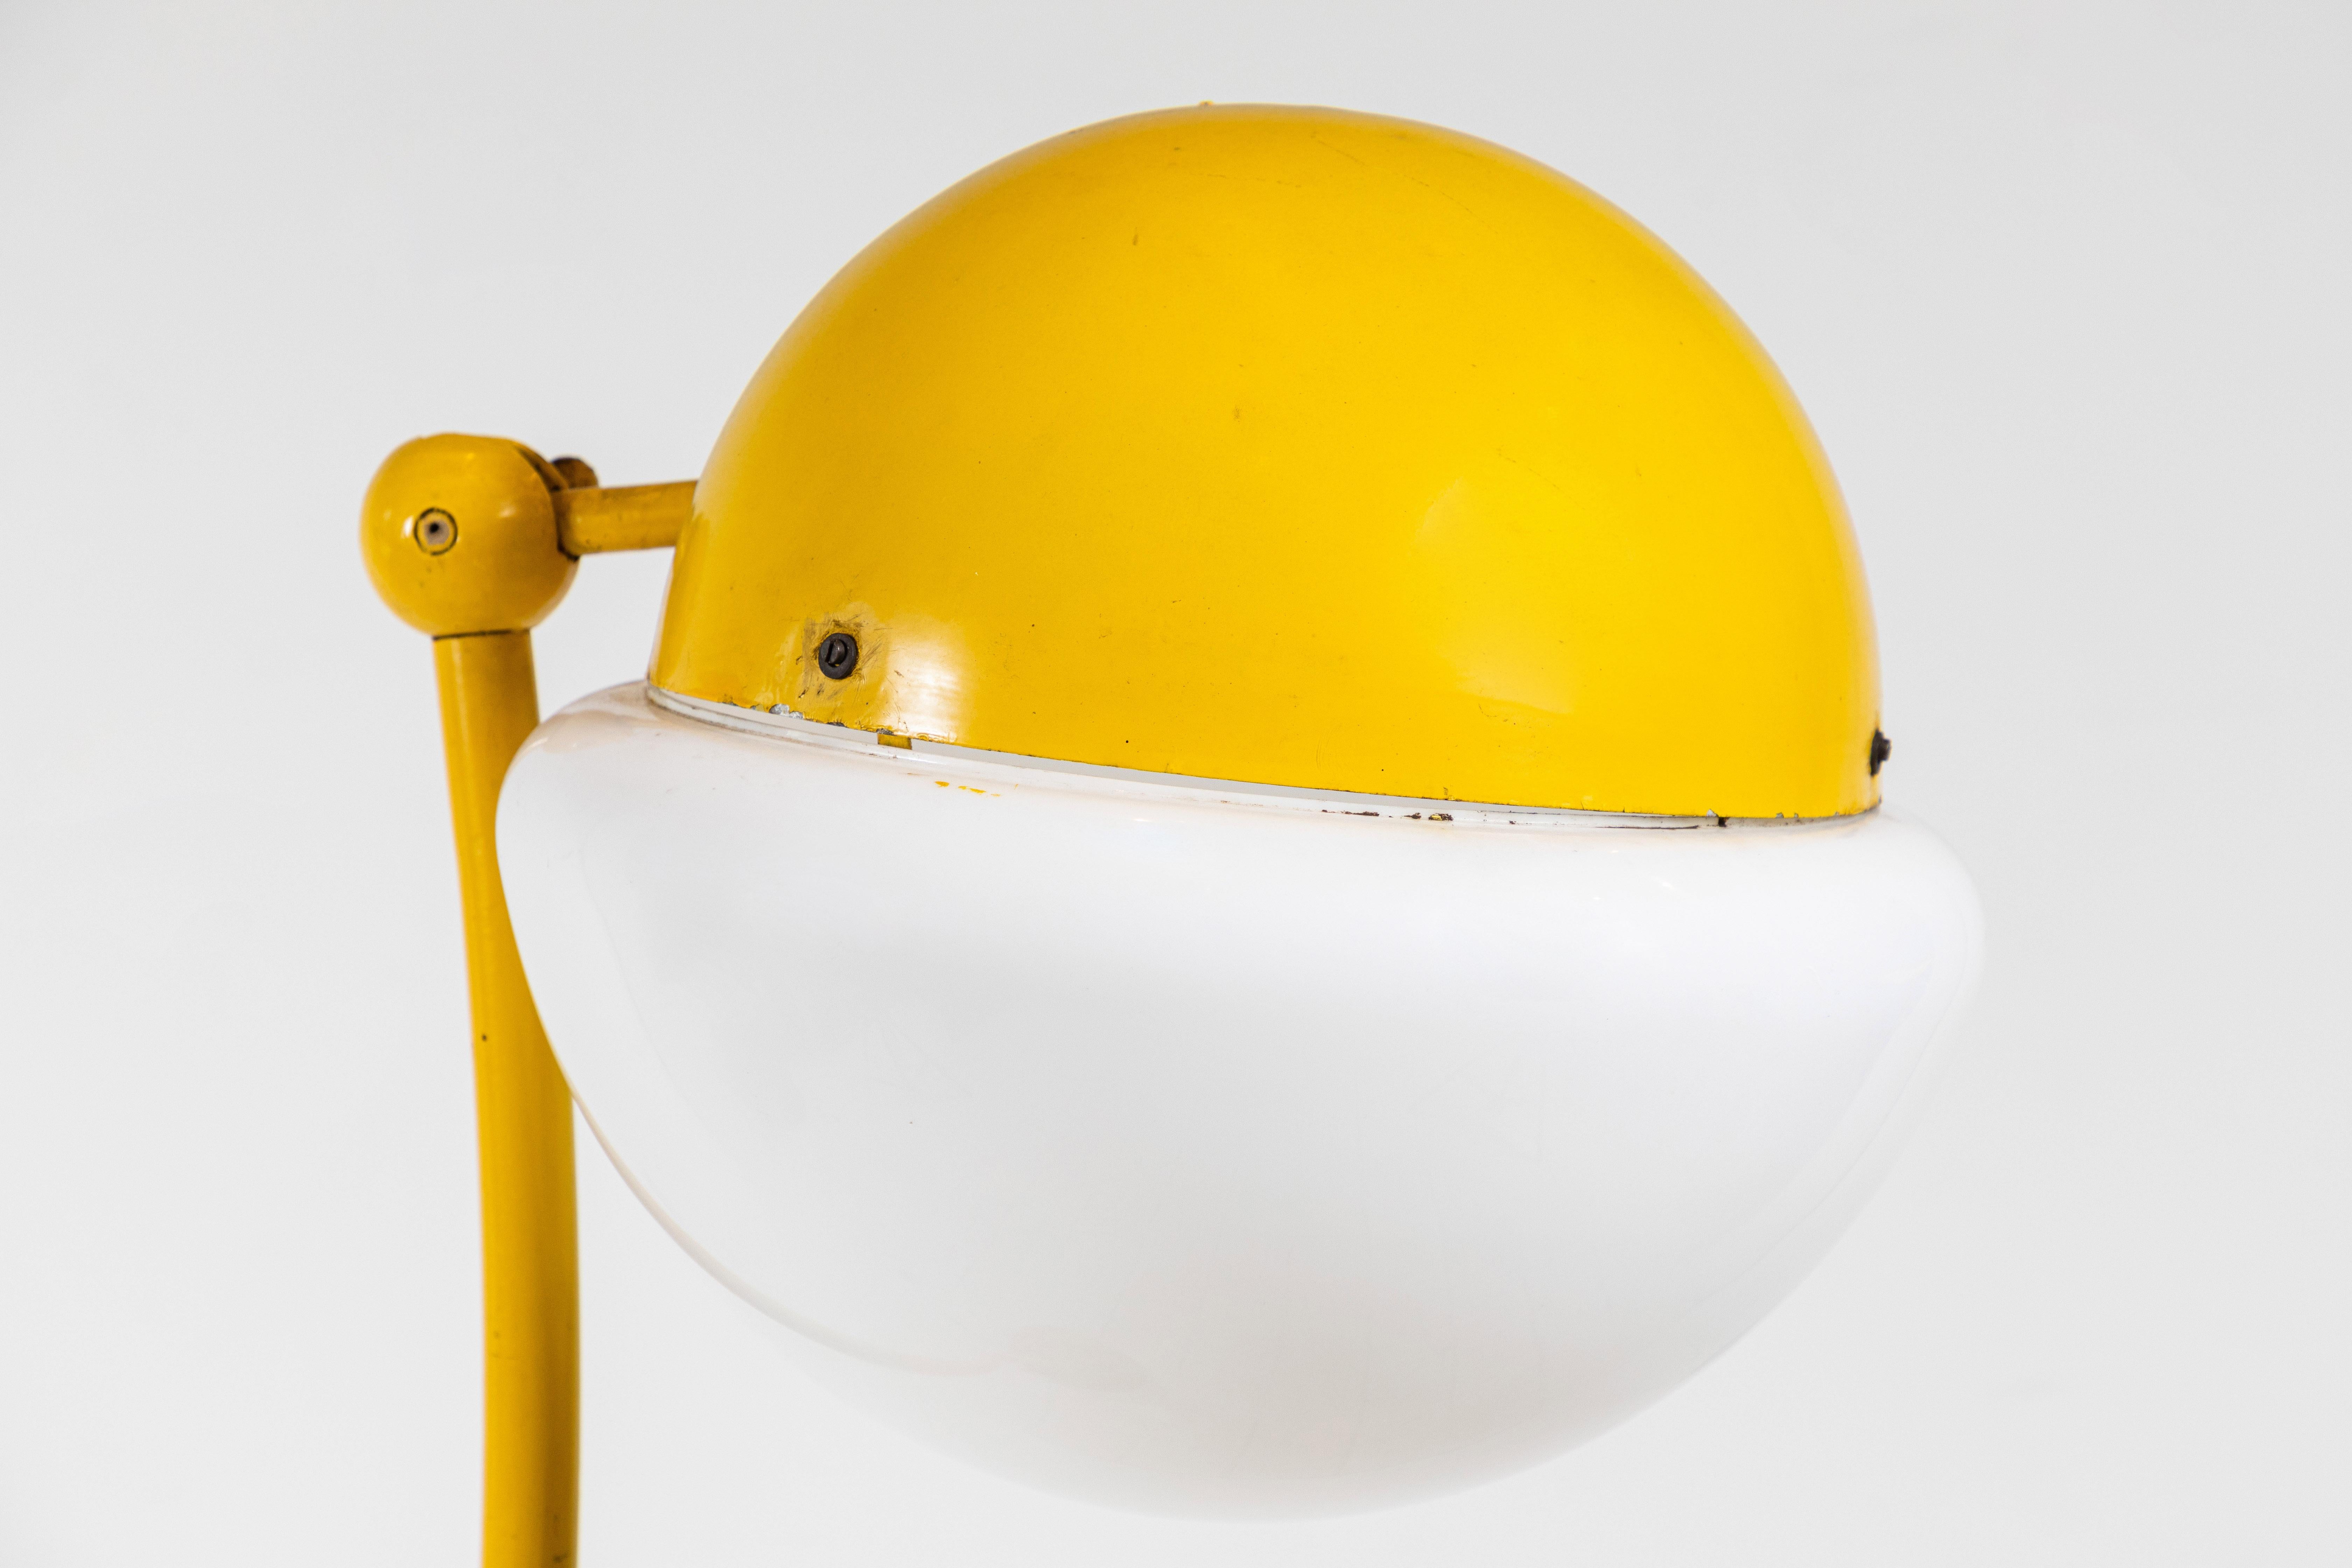 Original yellow paint adds character for the metal Locus Solus floor lamp by Gae Aulenti. The lamp has been newly rewired. The lamp has an adjustable neck and the head pivots up and down.